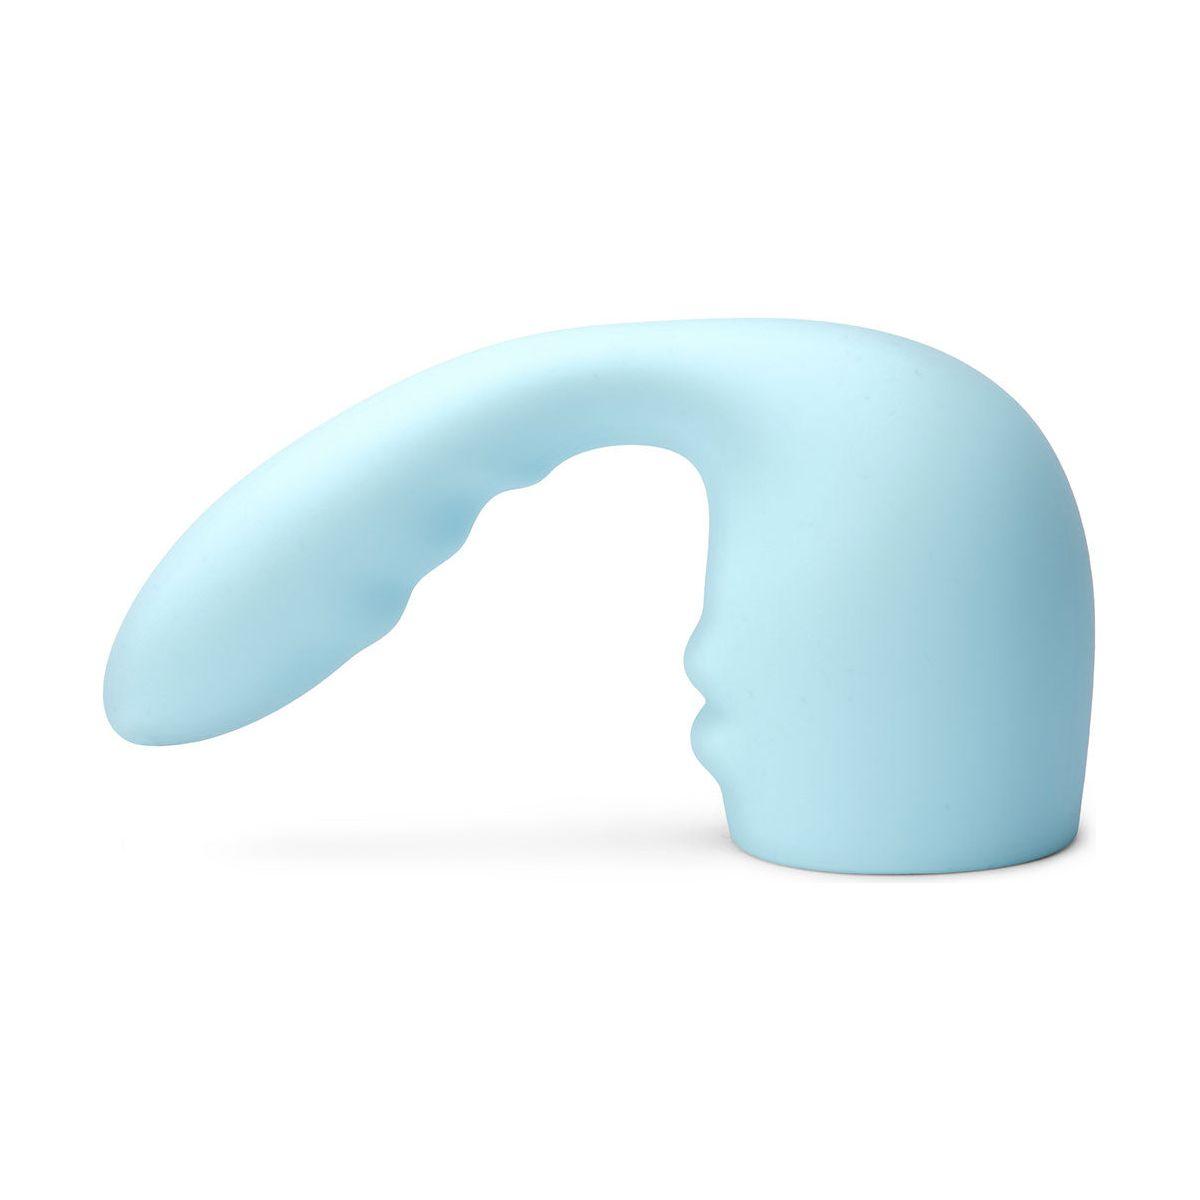 https://cdn.shopify.com/s/files/1/0441/6841/3348/products/le-wand-flexi-silicone-attachment-shop-enby-1_1600x.jpg?v=1694334488